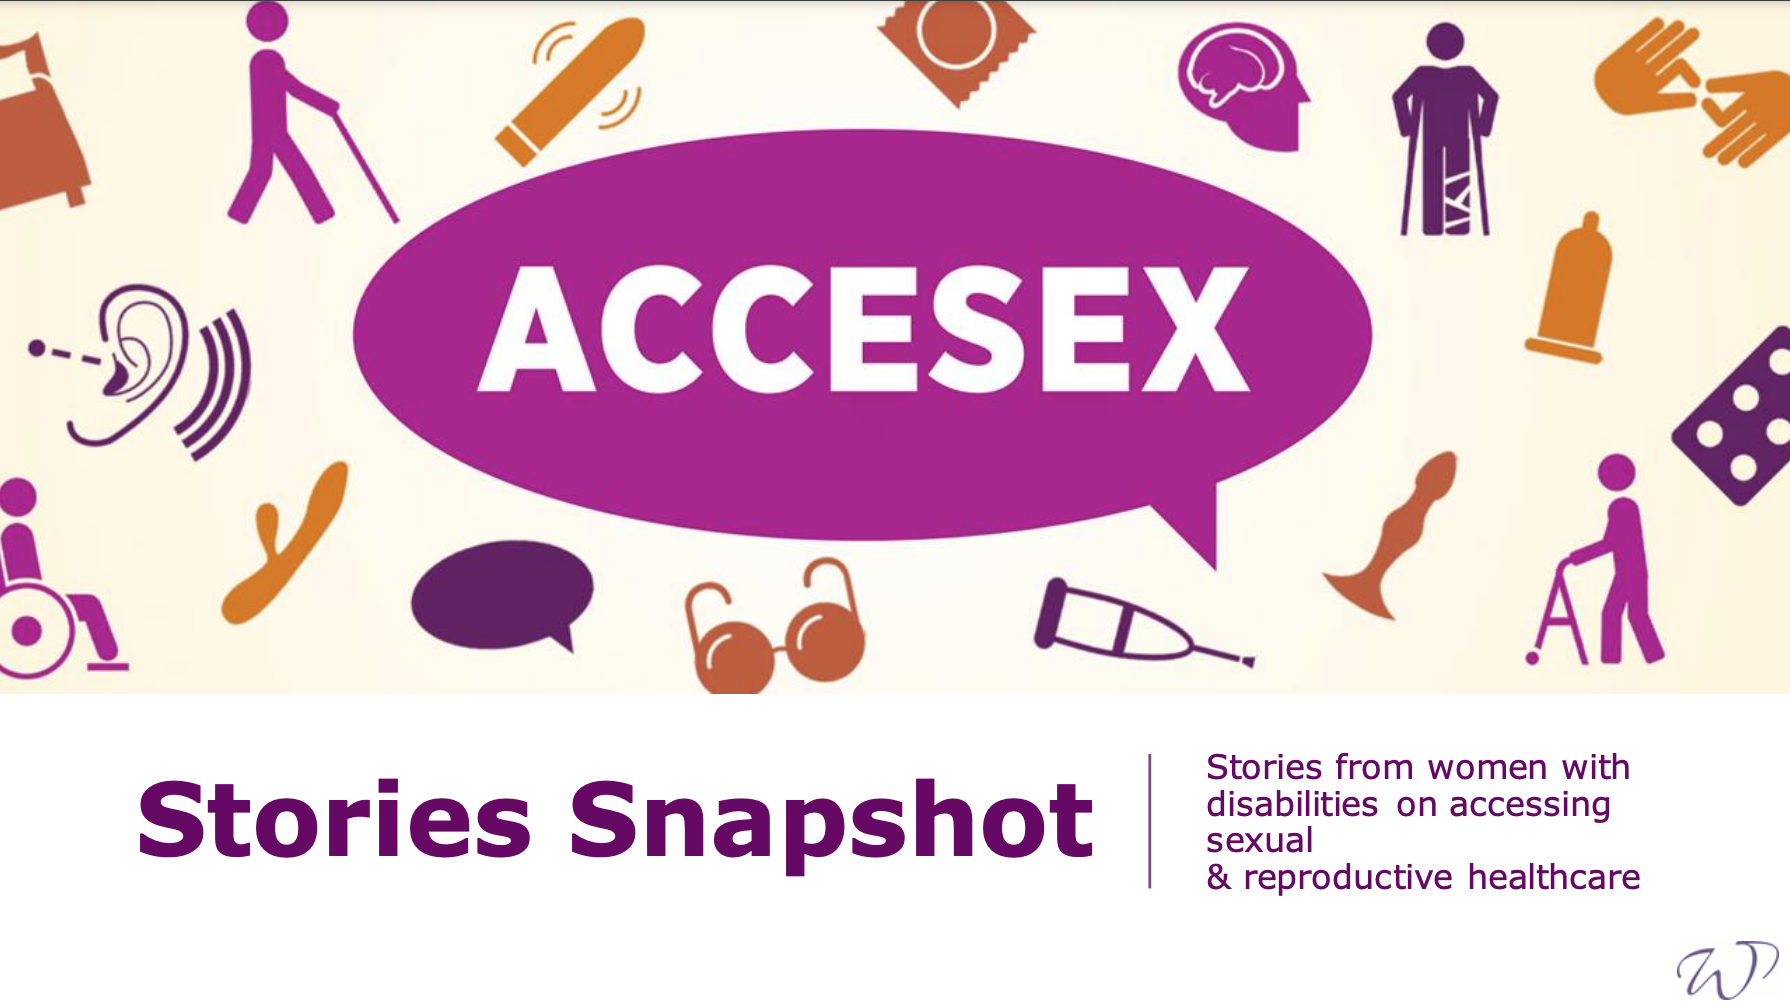 ACCESEX Stories snapshot. Stories from women with disabilities on accessing sexual and reproductive healthcare